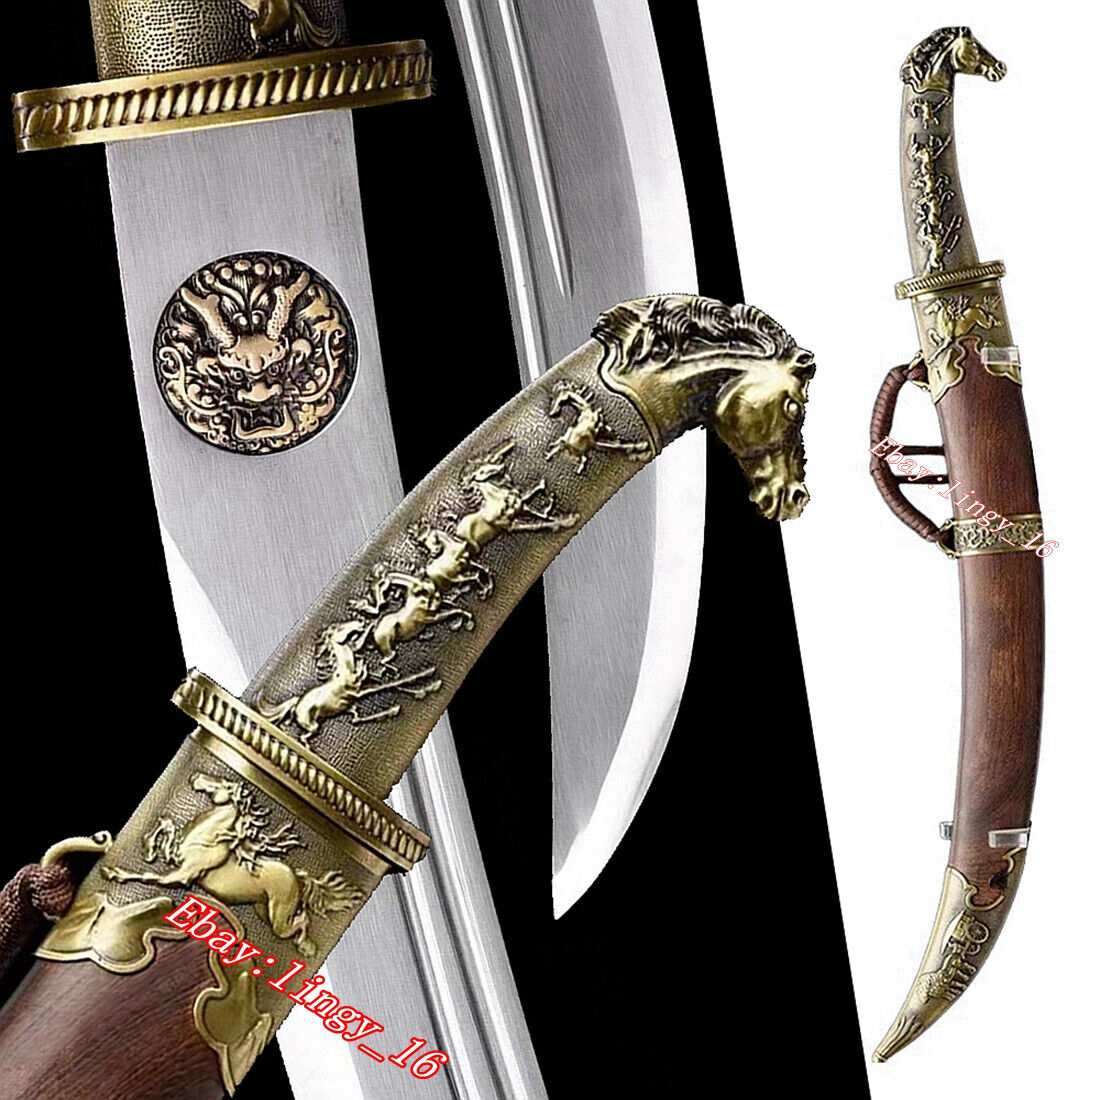 Mongolian Dao Horse Head Sword Chinese 1095High Carbon Steel Sharp Cavalry Saber